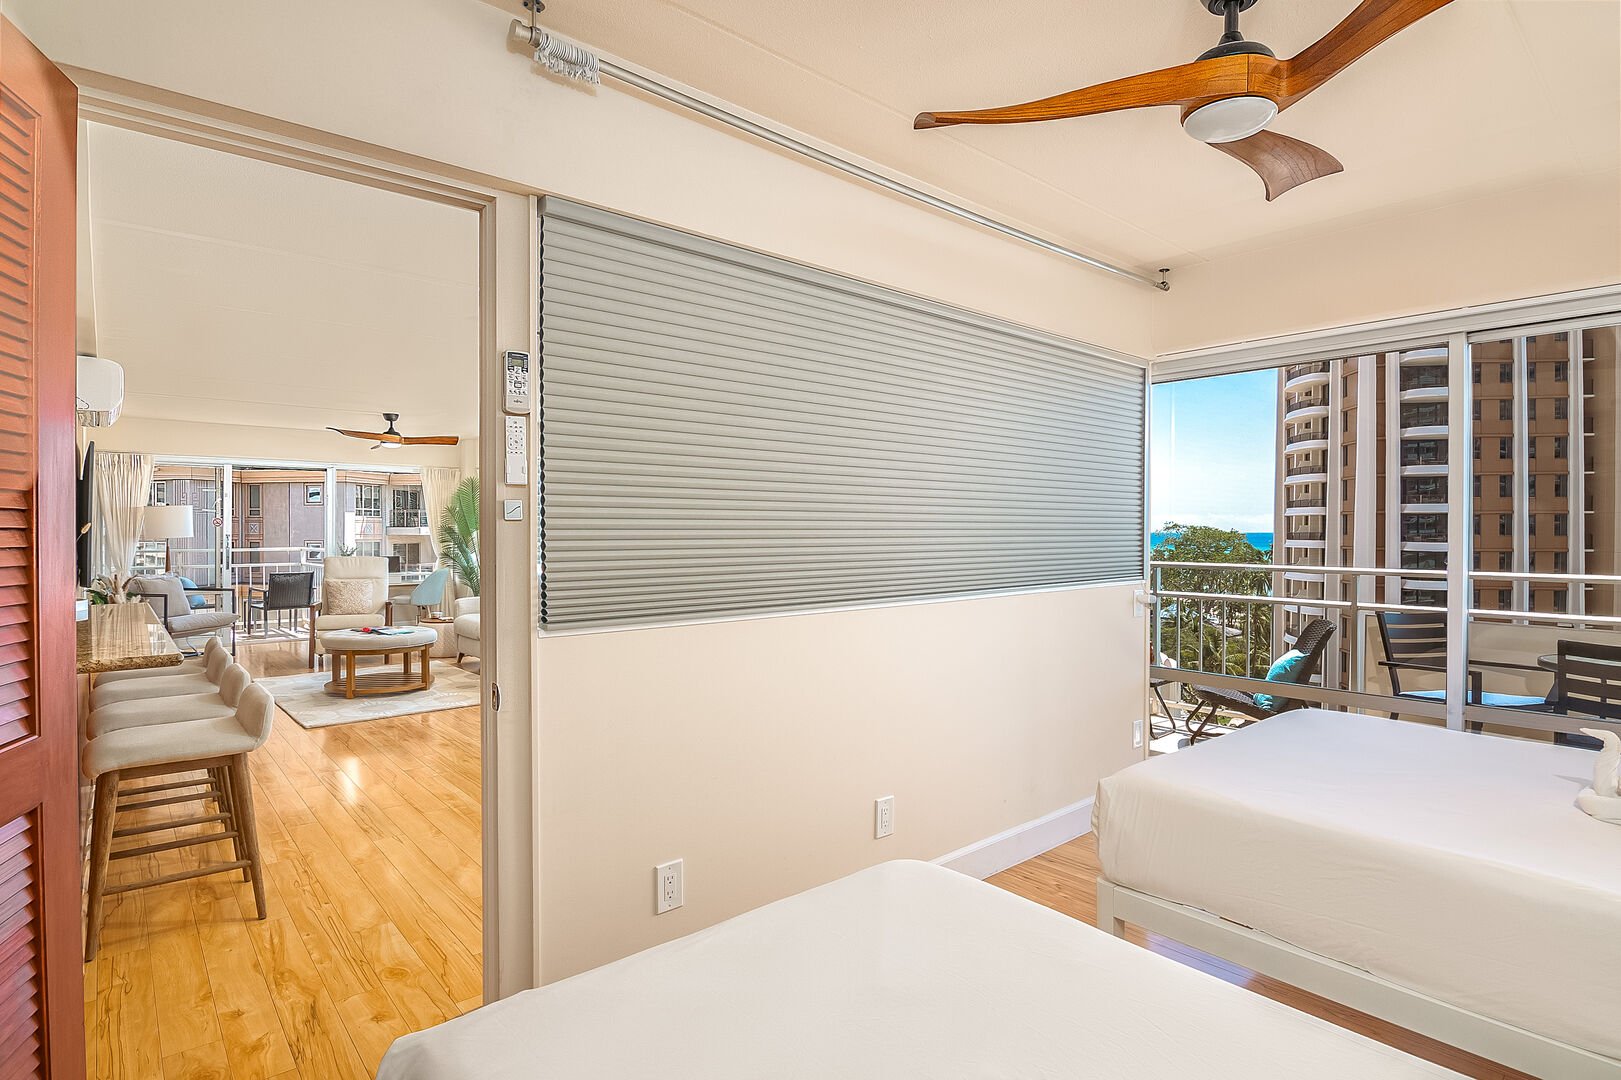 The second bedroom with 2 beds and motorized window blinds offers the option of having privacy or connecting the room and view to the rest of the living space.